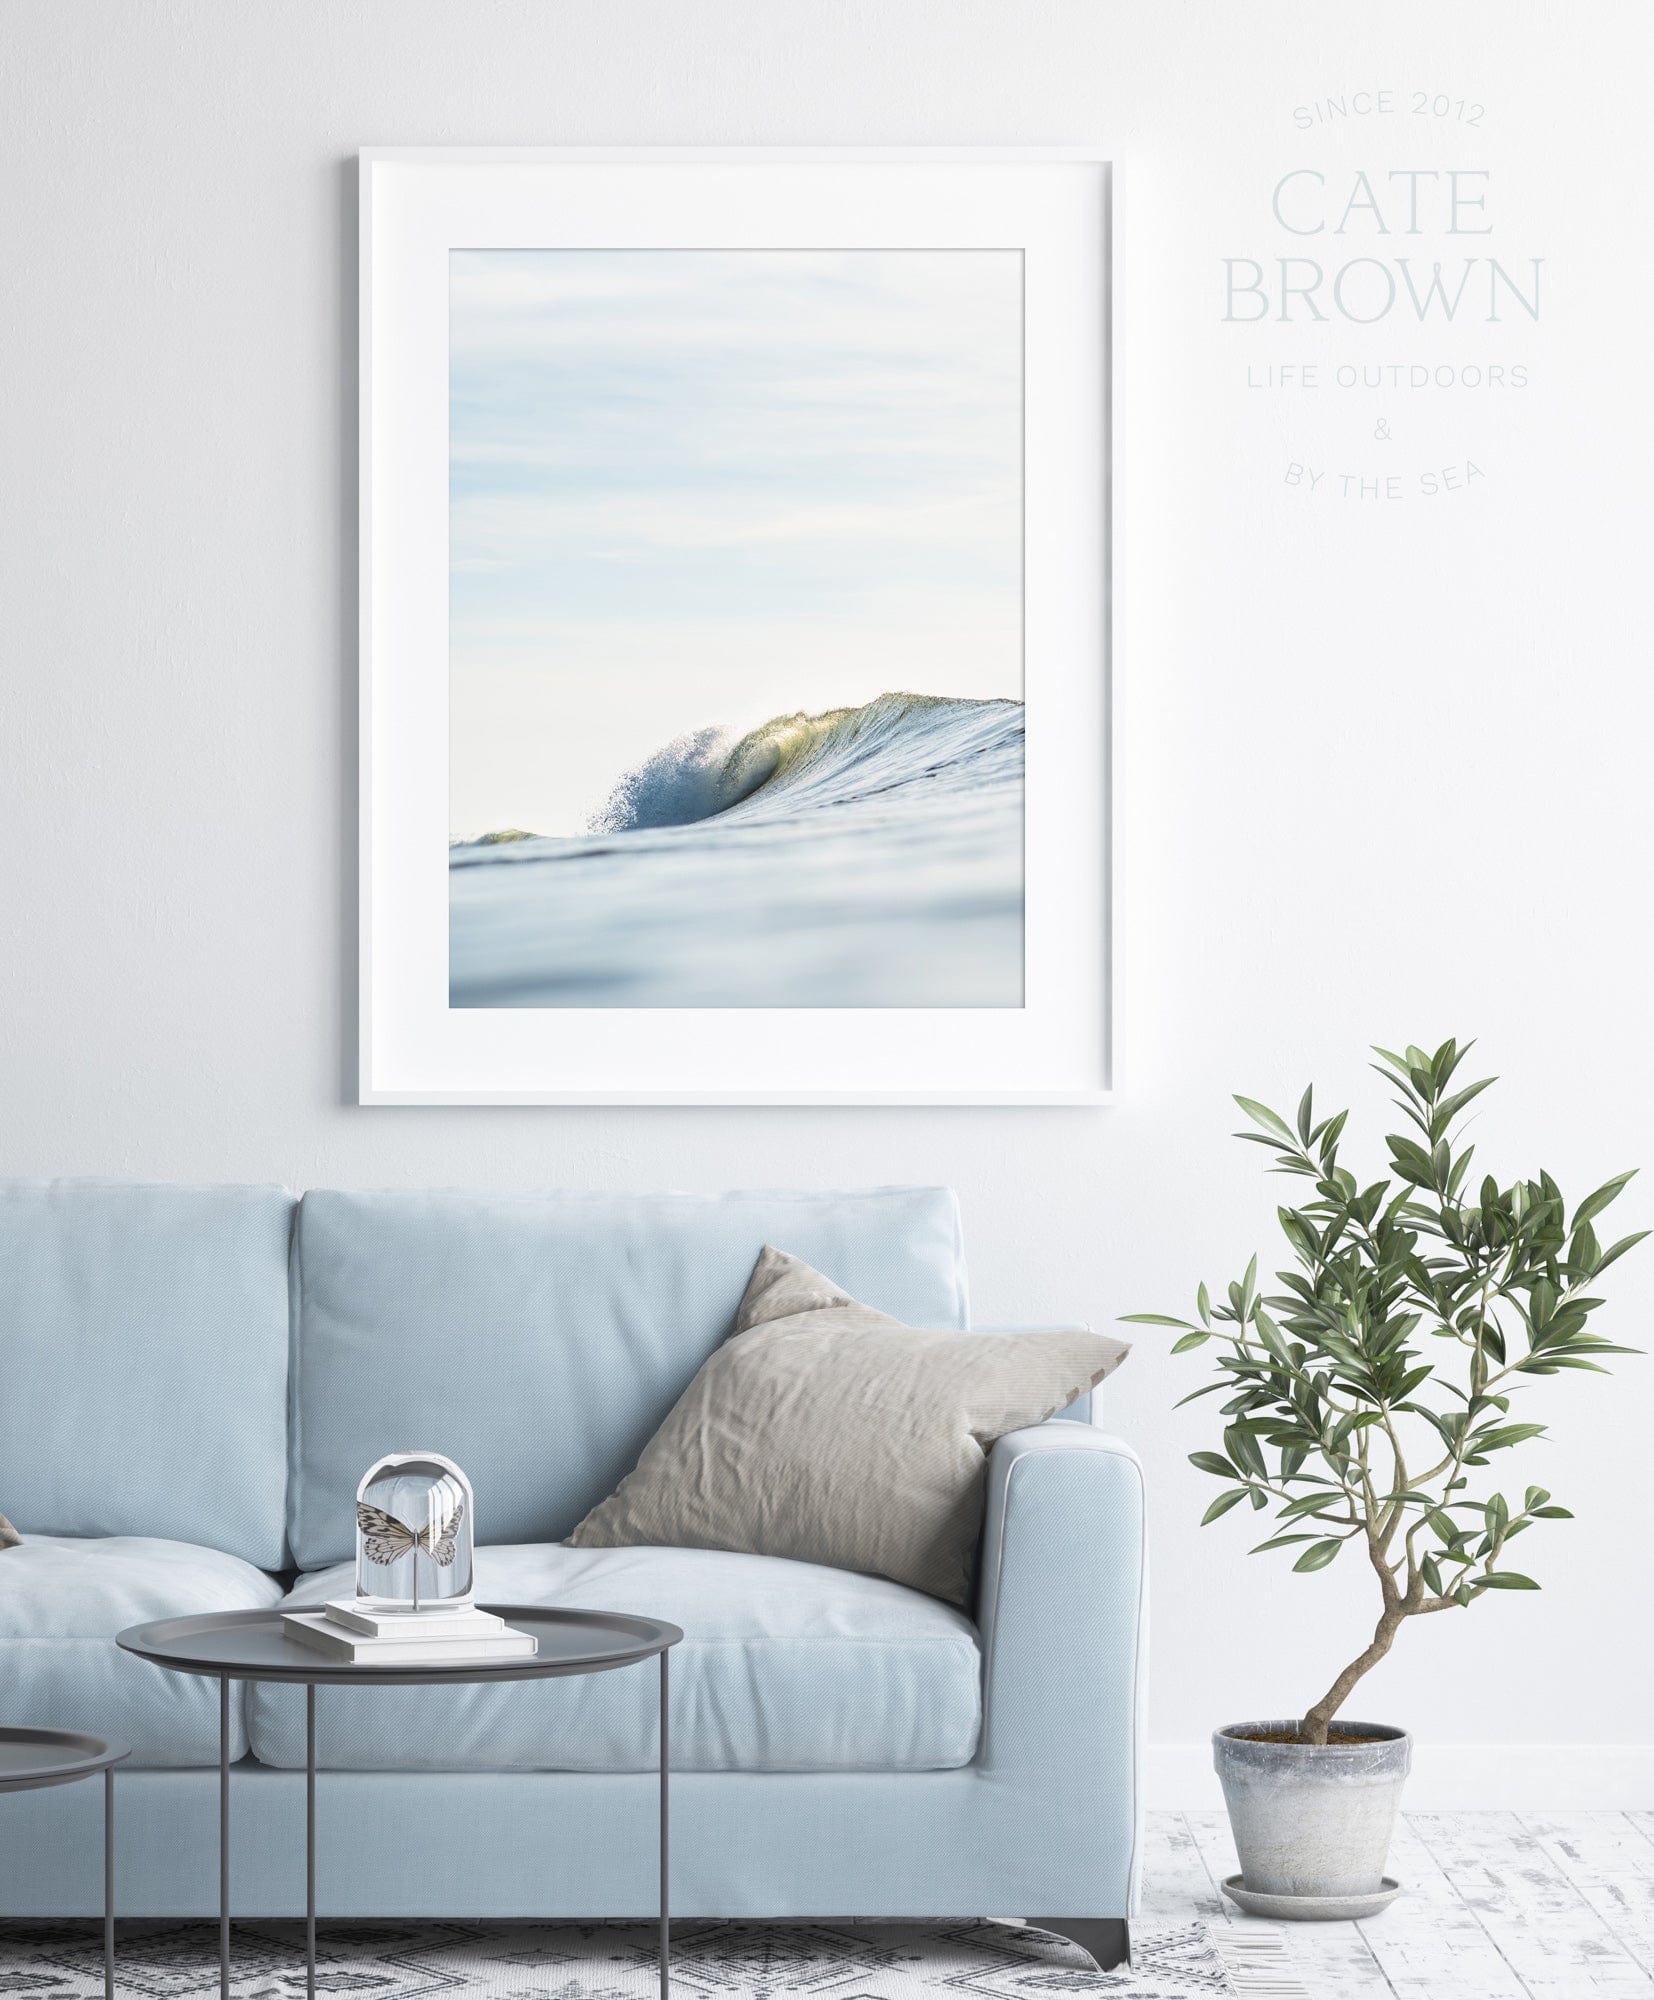 Cate Brown Photo Fine Art Print / 8"x12" / None (Print Only) Morning Bright  //  Ocean Photography Made to Order Ocean Fine Art